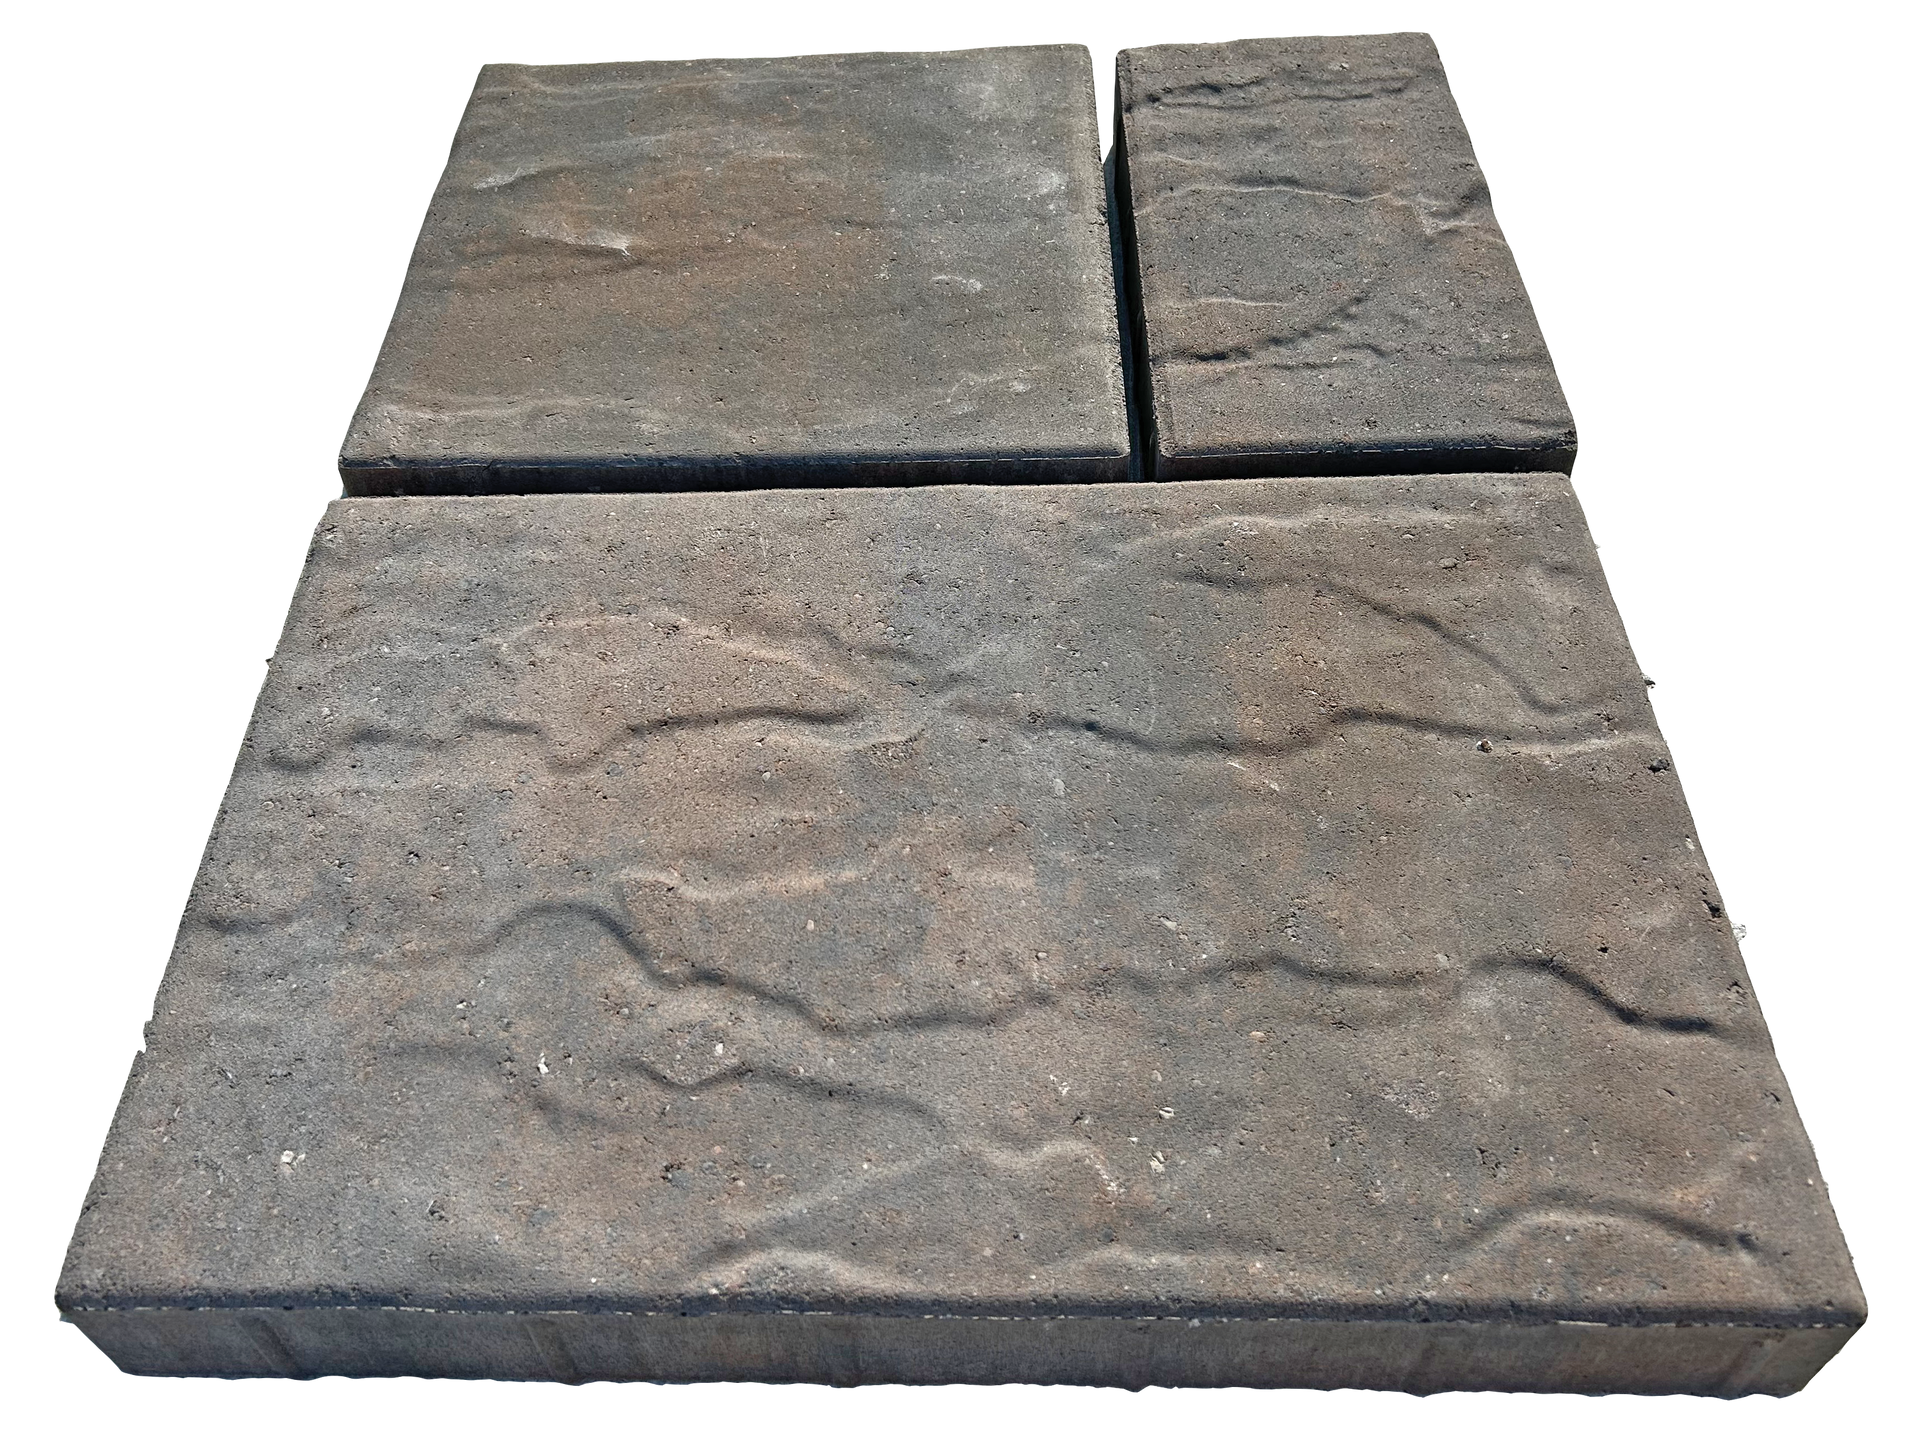 Stockman Stoneworks Makes & Sells the Durable Valencia Valley Patio Pavers in Missouri.